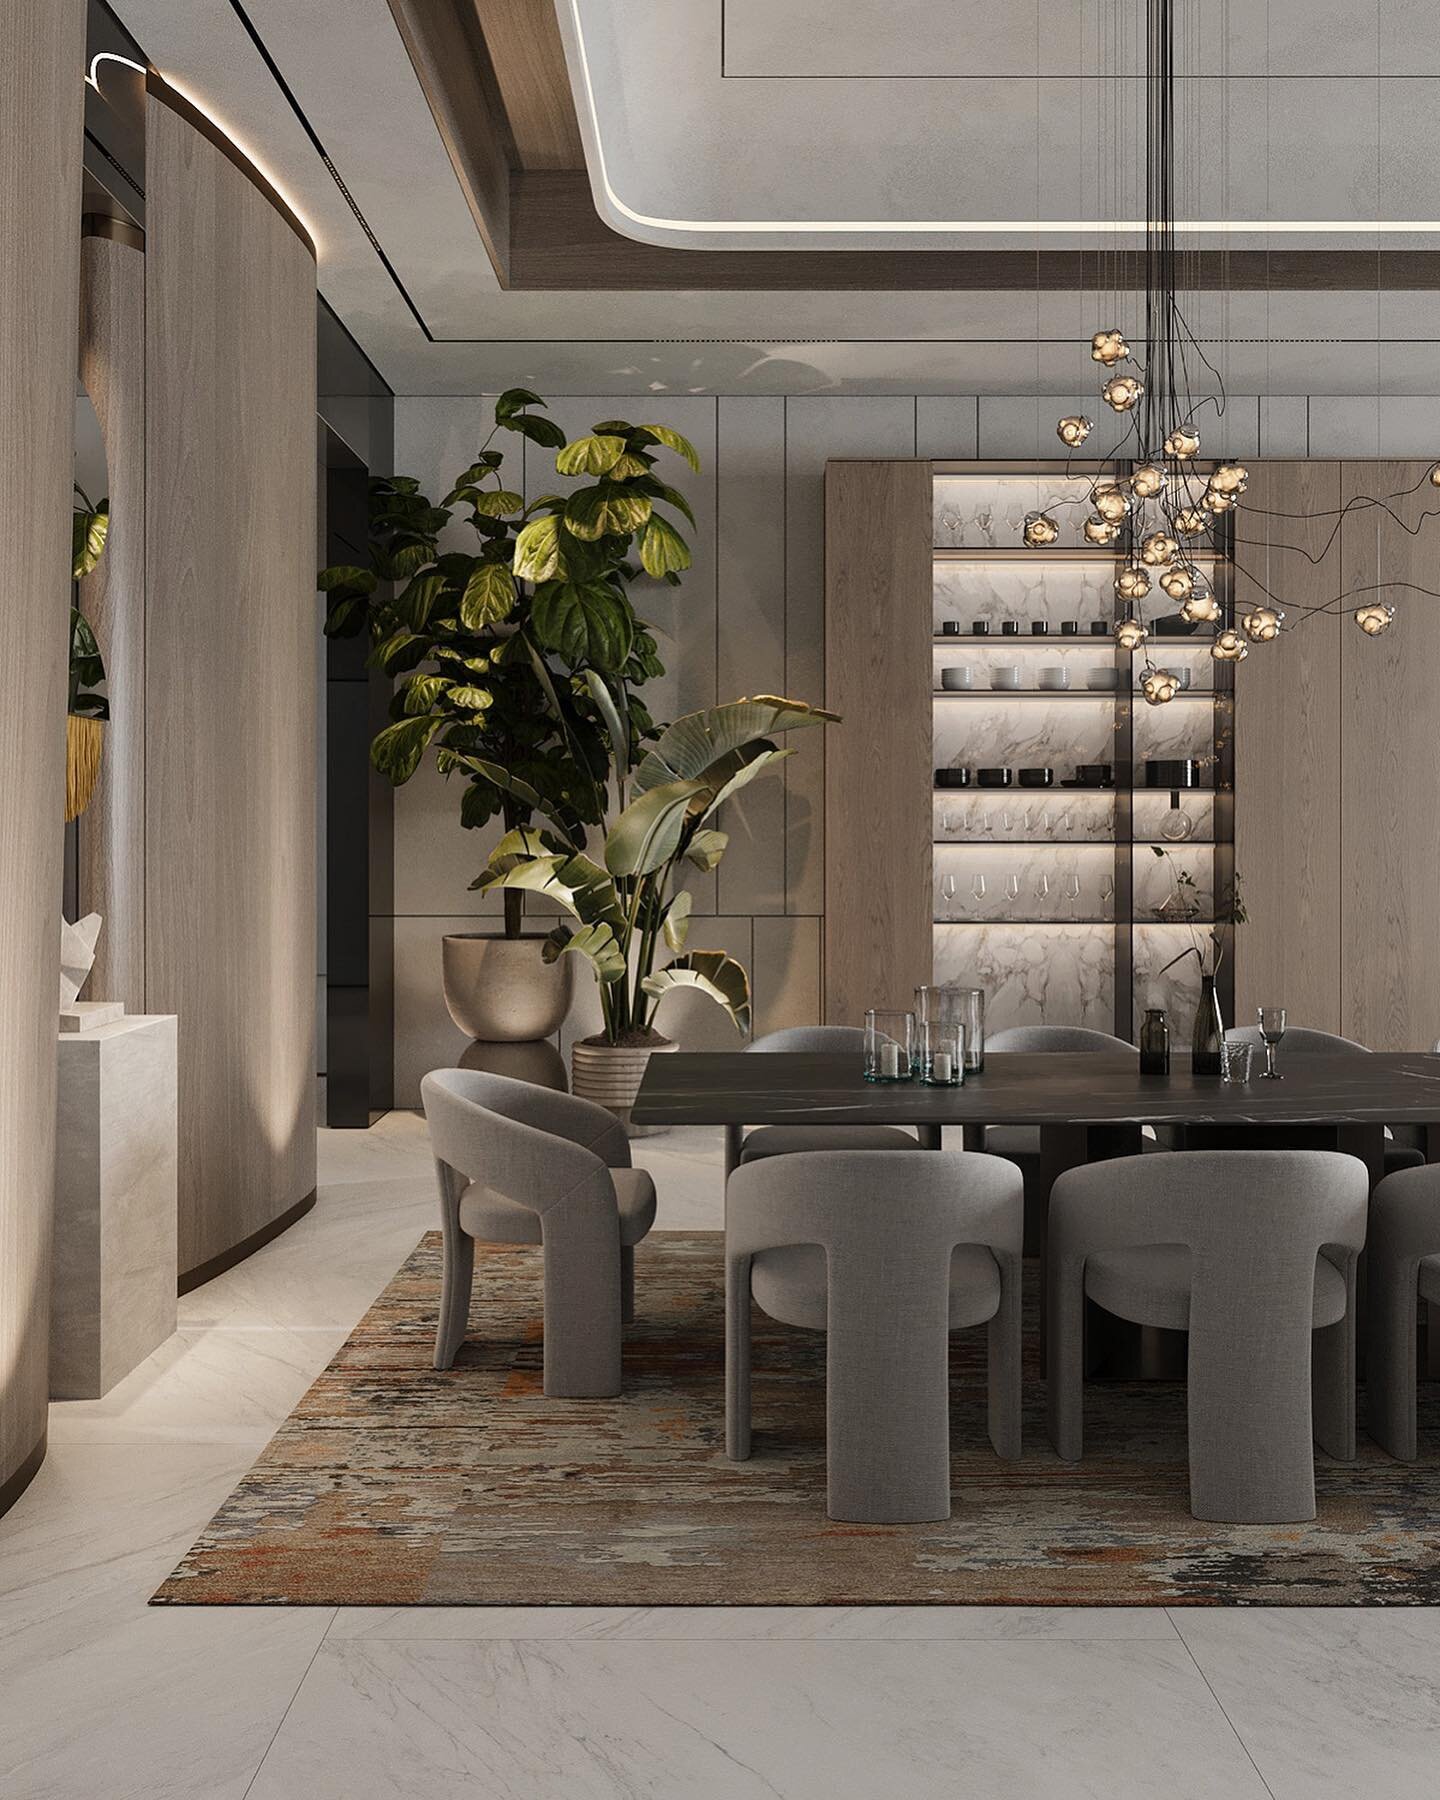 Enter the enchanting world of luxury decor within this remarkable home, crafted by the genius of NK Interiors. In the dining room, a crisp and sophisticated ambiance envelops you with elegant gray and warm beige tones.

Imagine gray dining chairs for